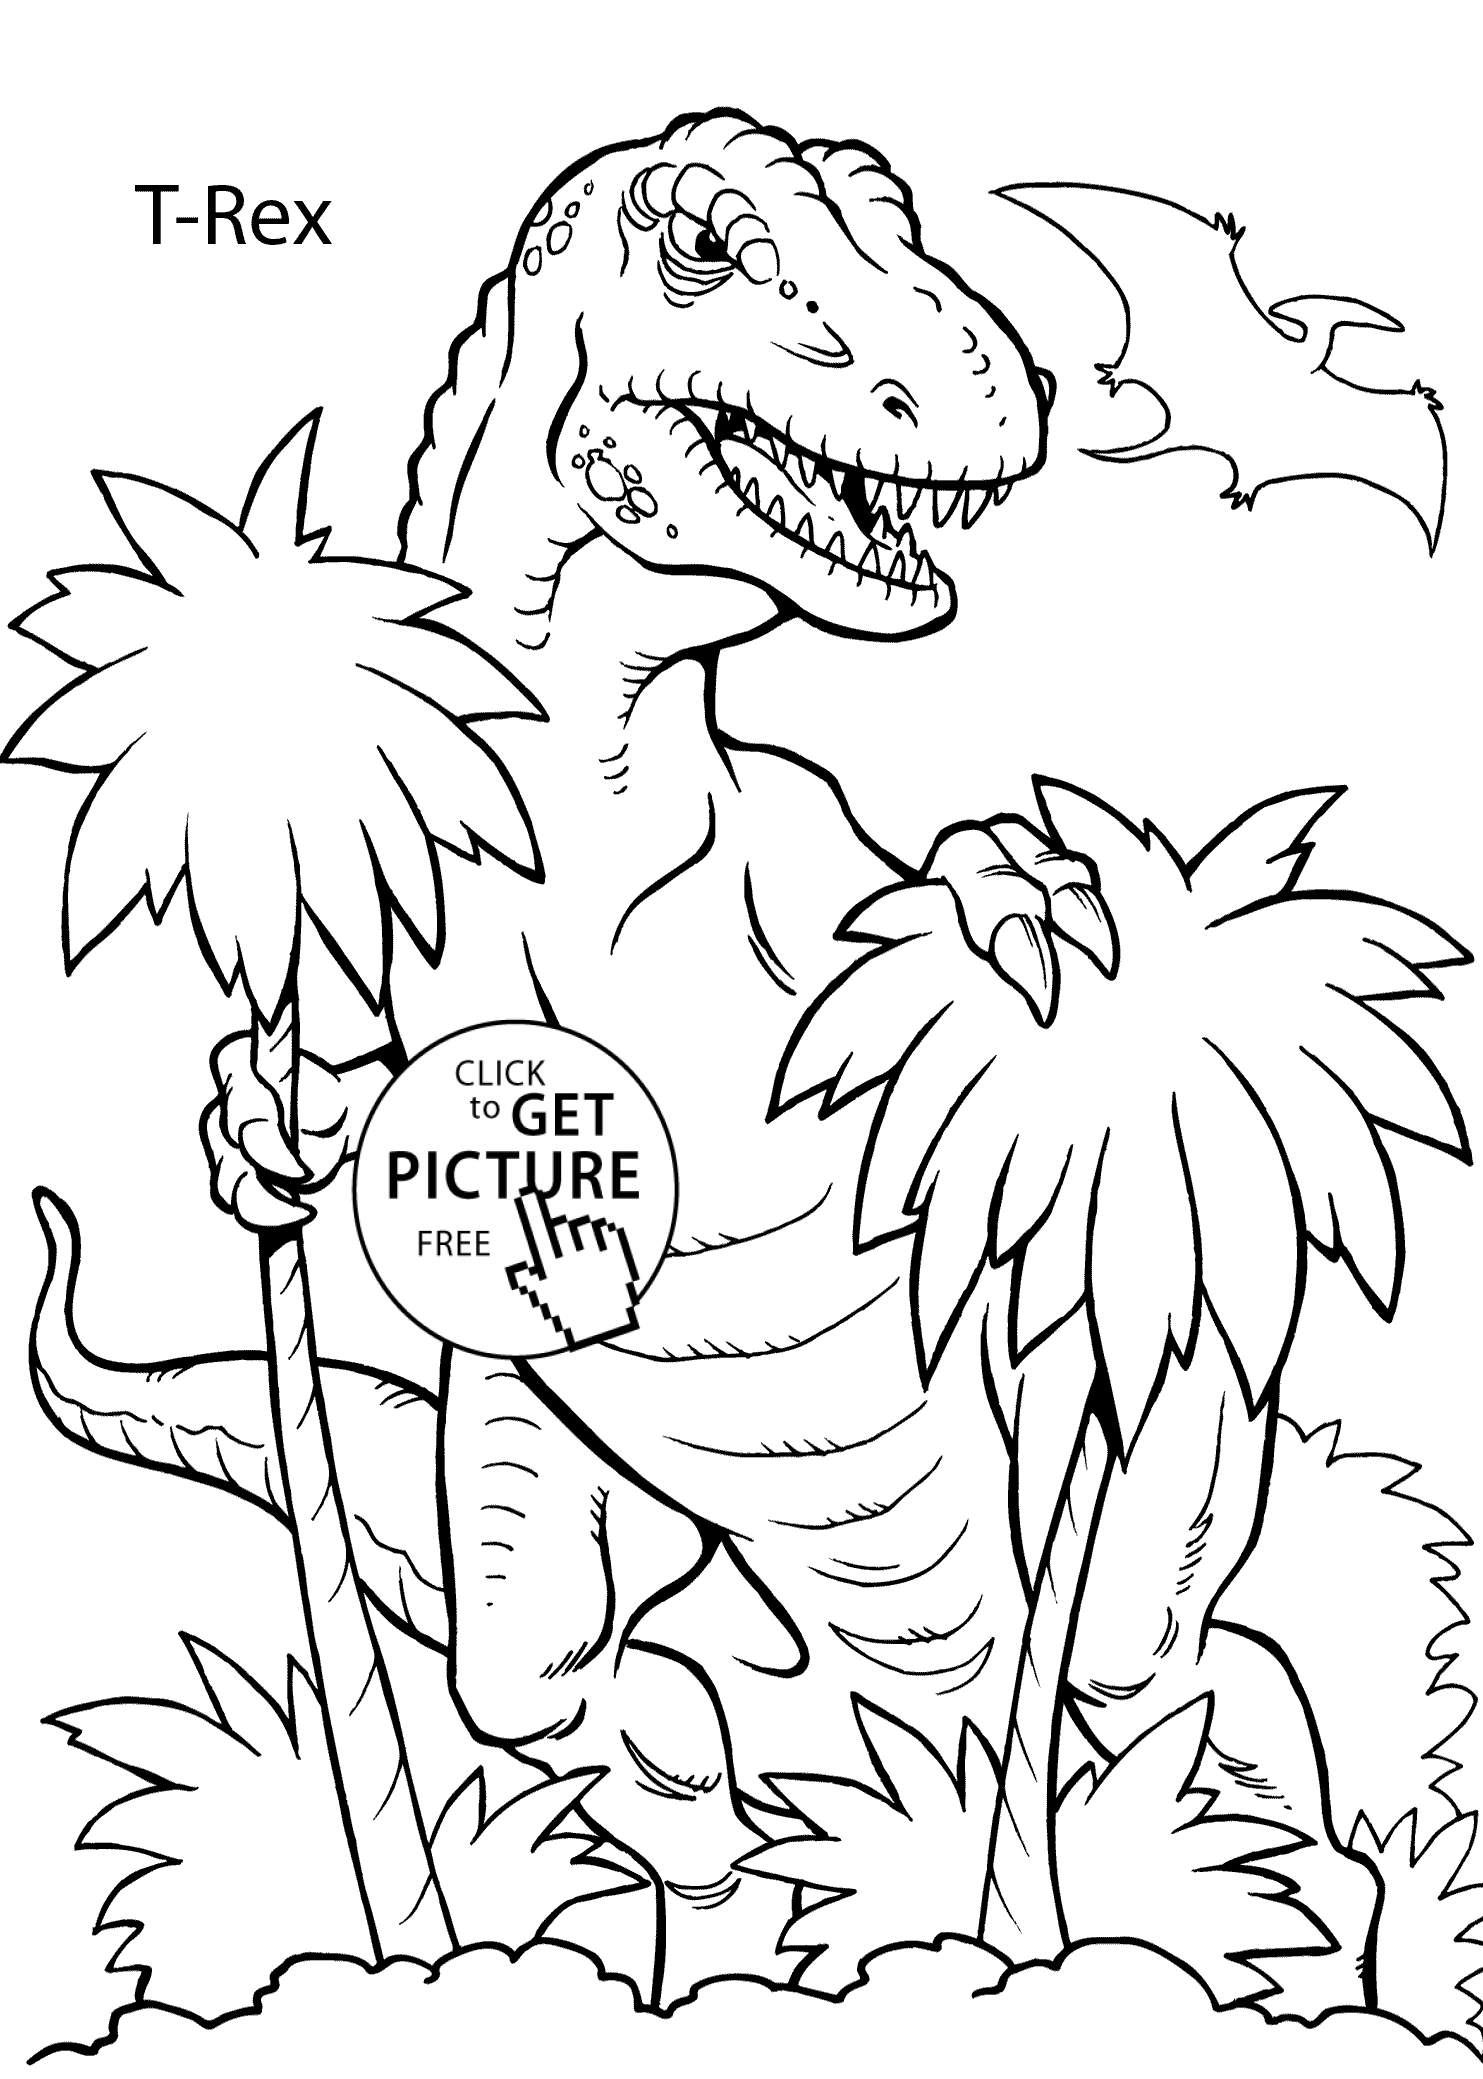 T-Rex dinosaur coloring pages for kids, printable free | coloing ...